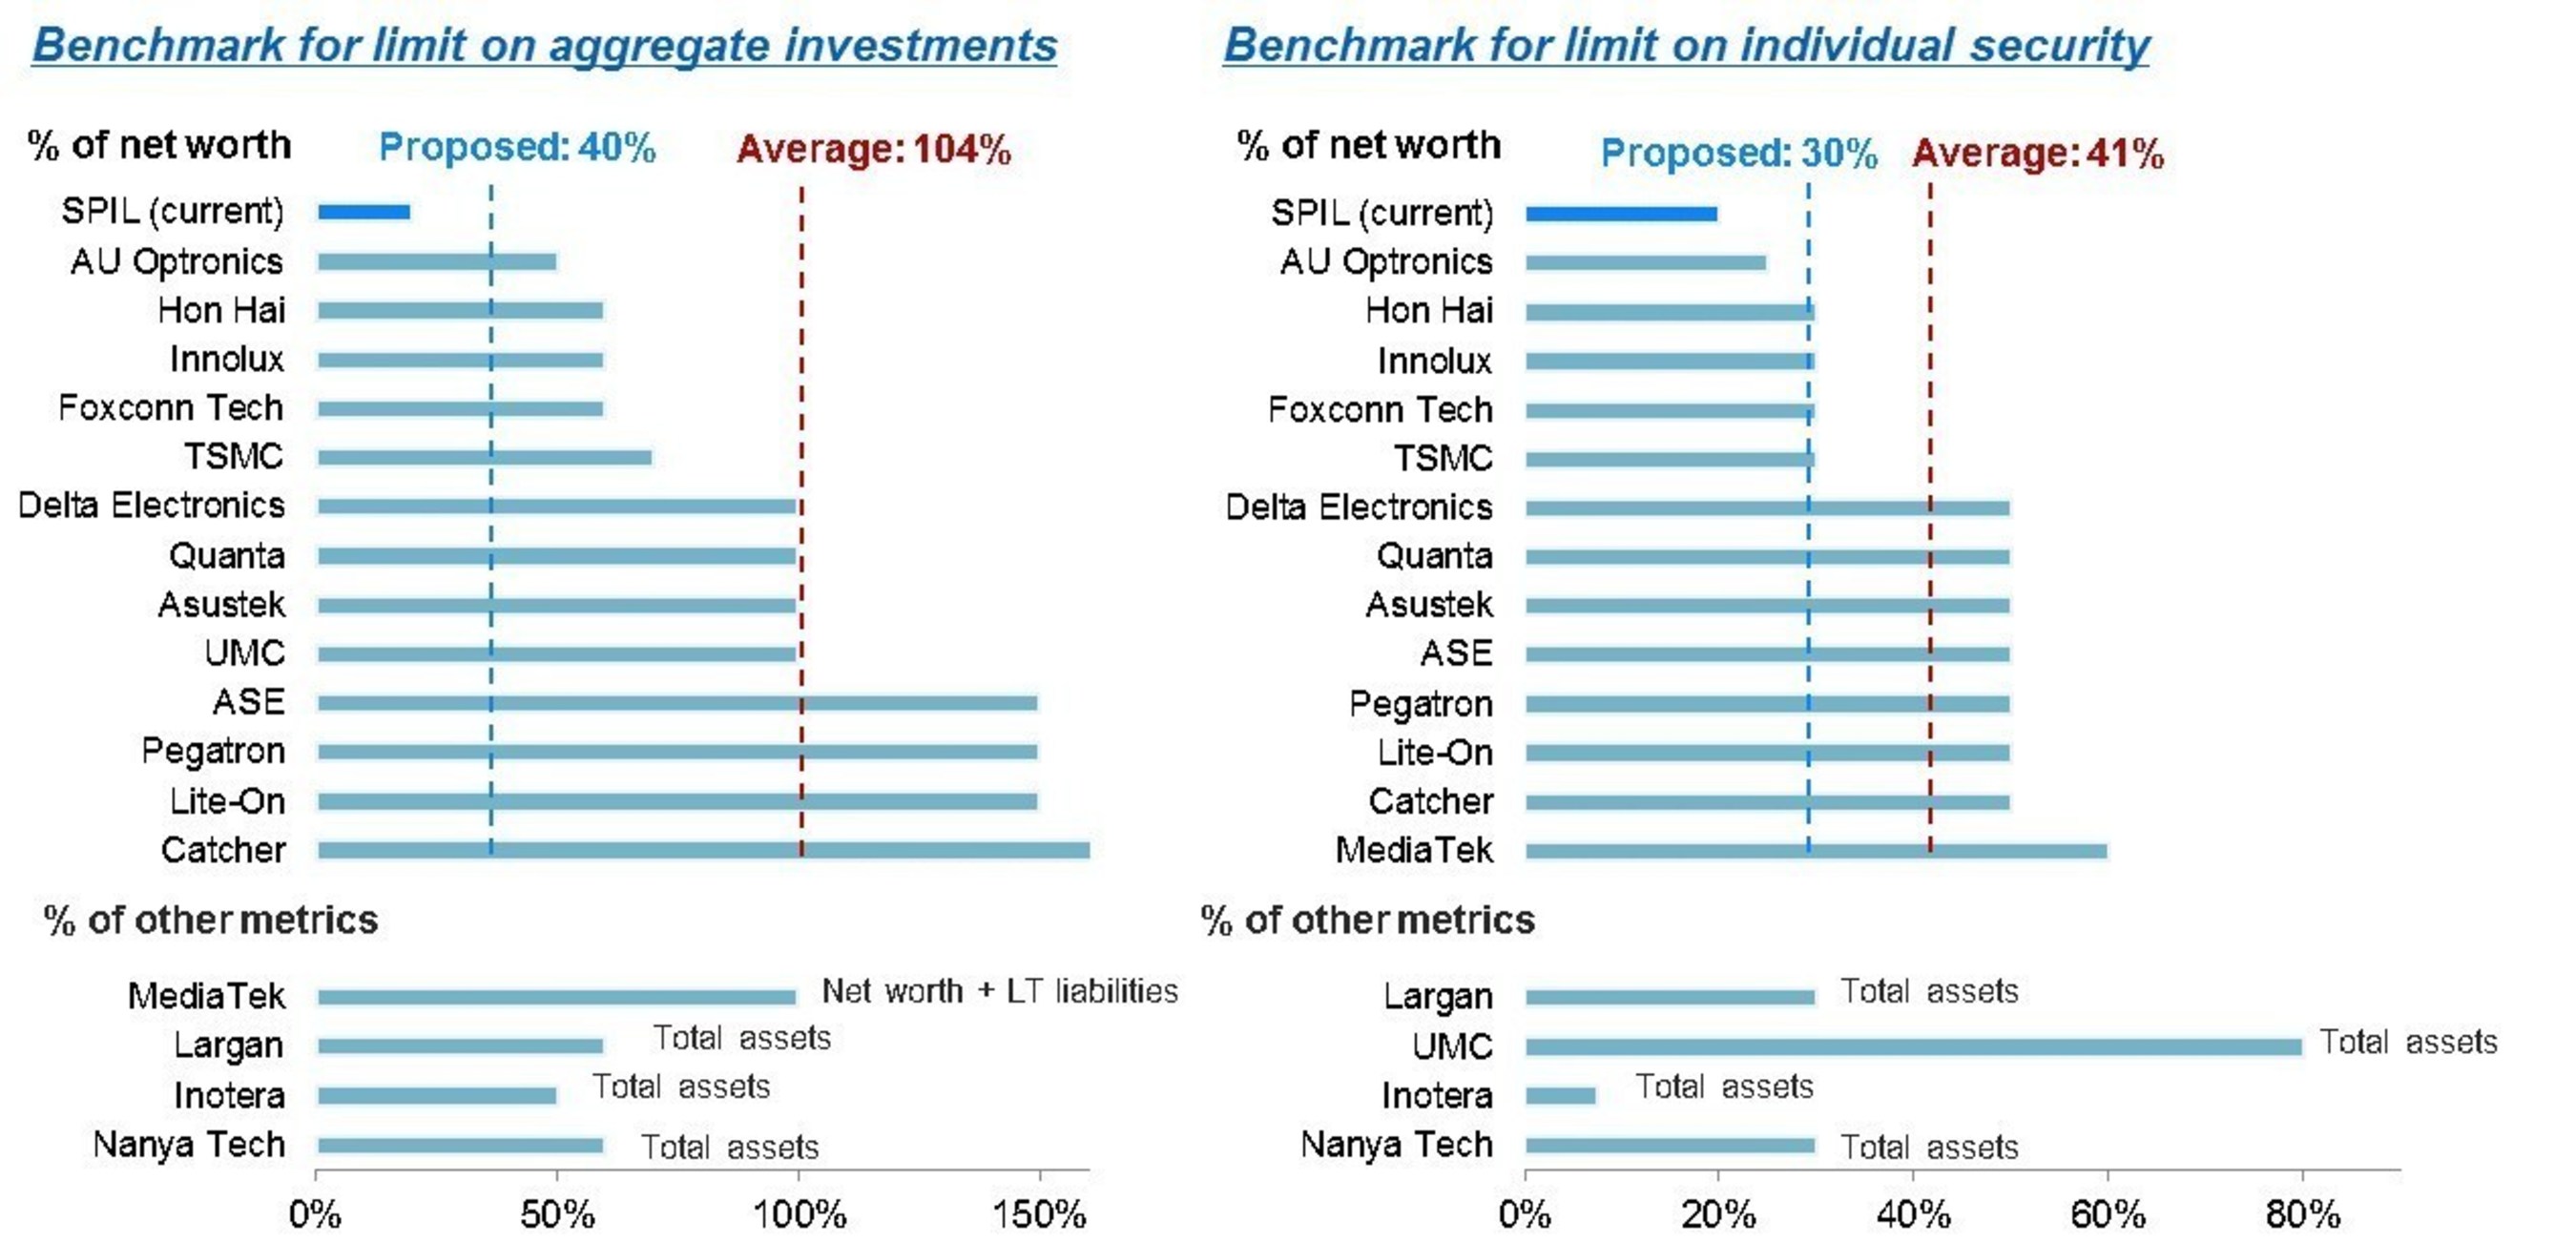 Benchmark for limit on aggregate investments and Benchmark for limit on individual security